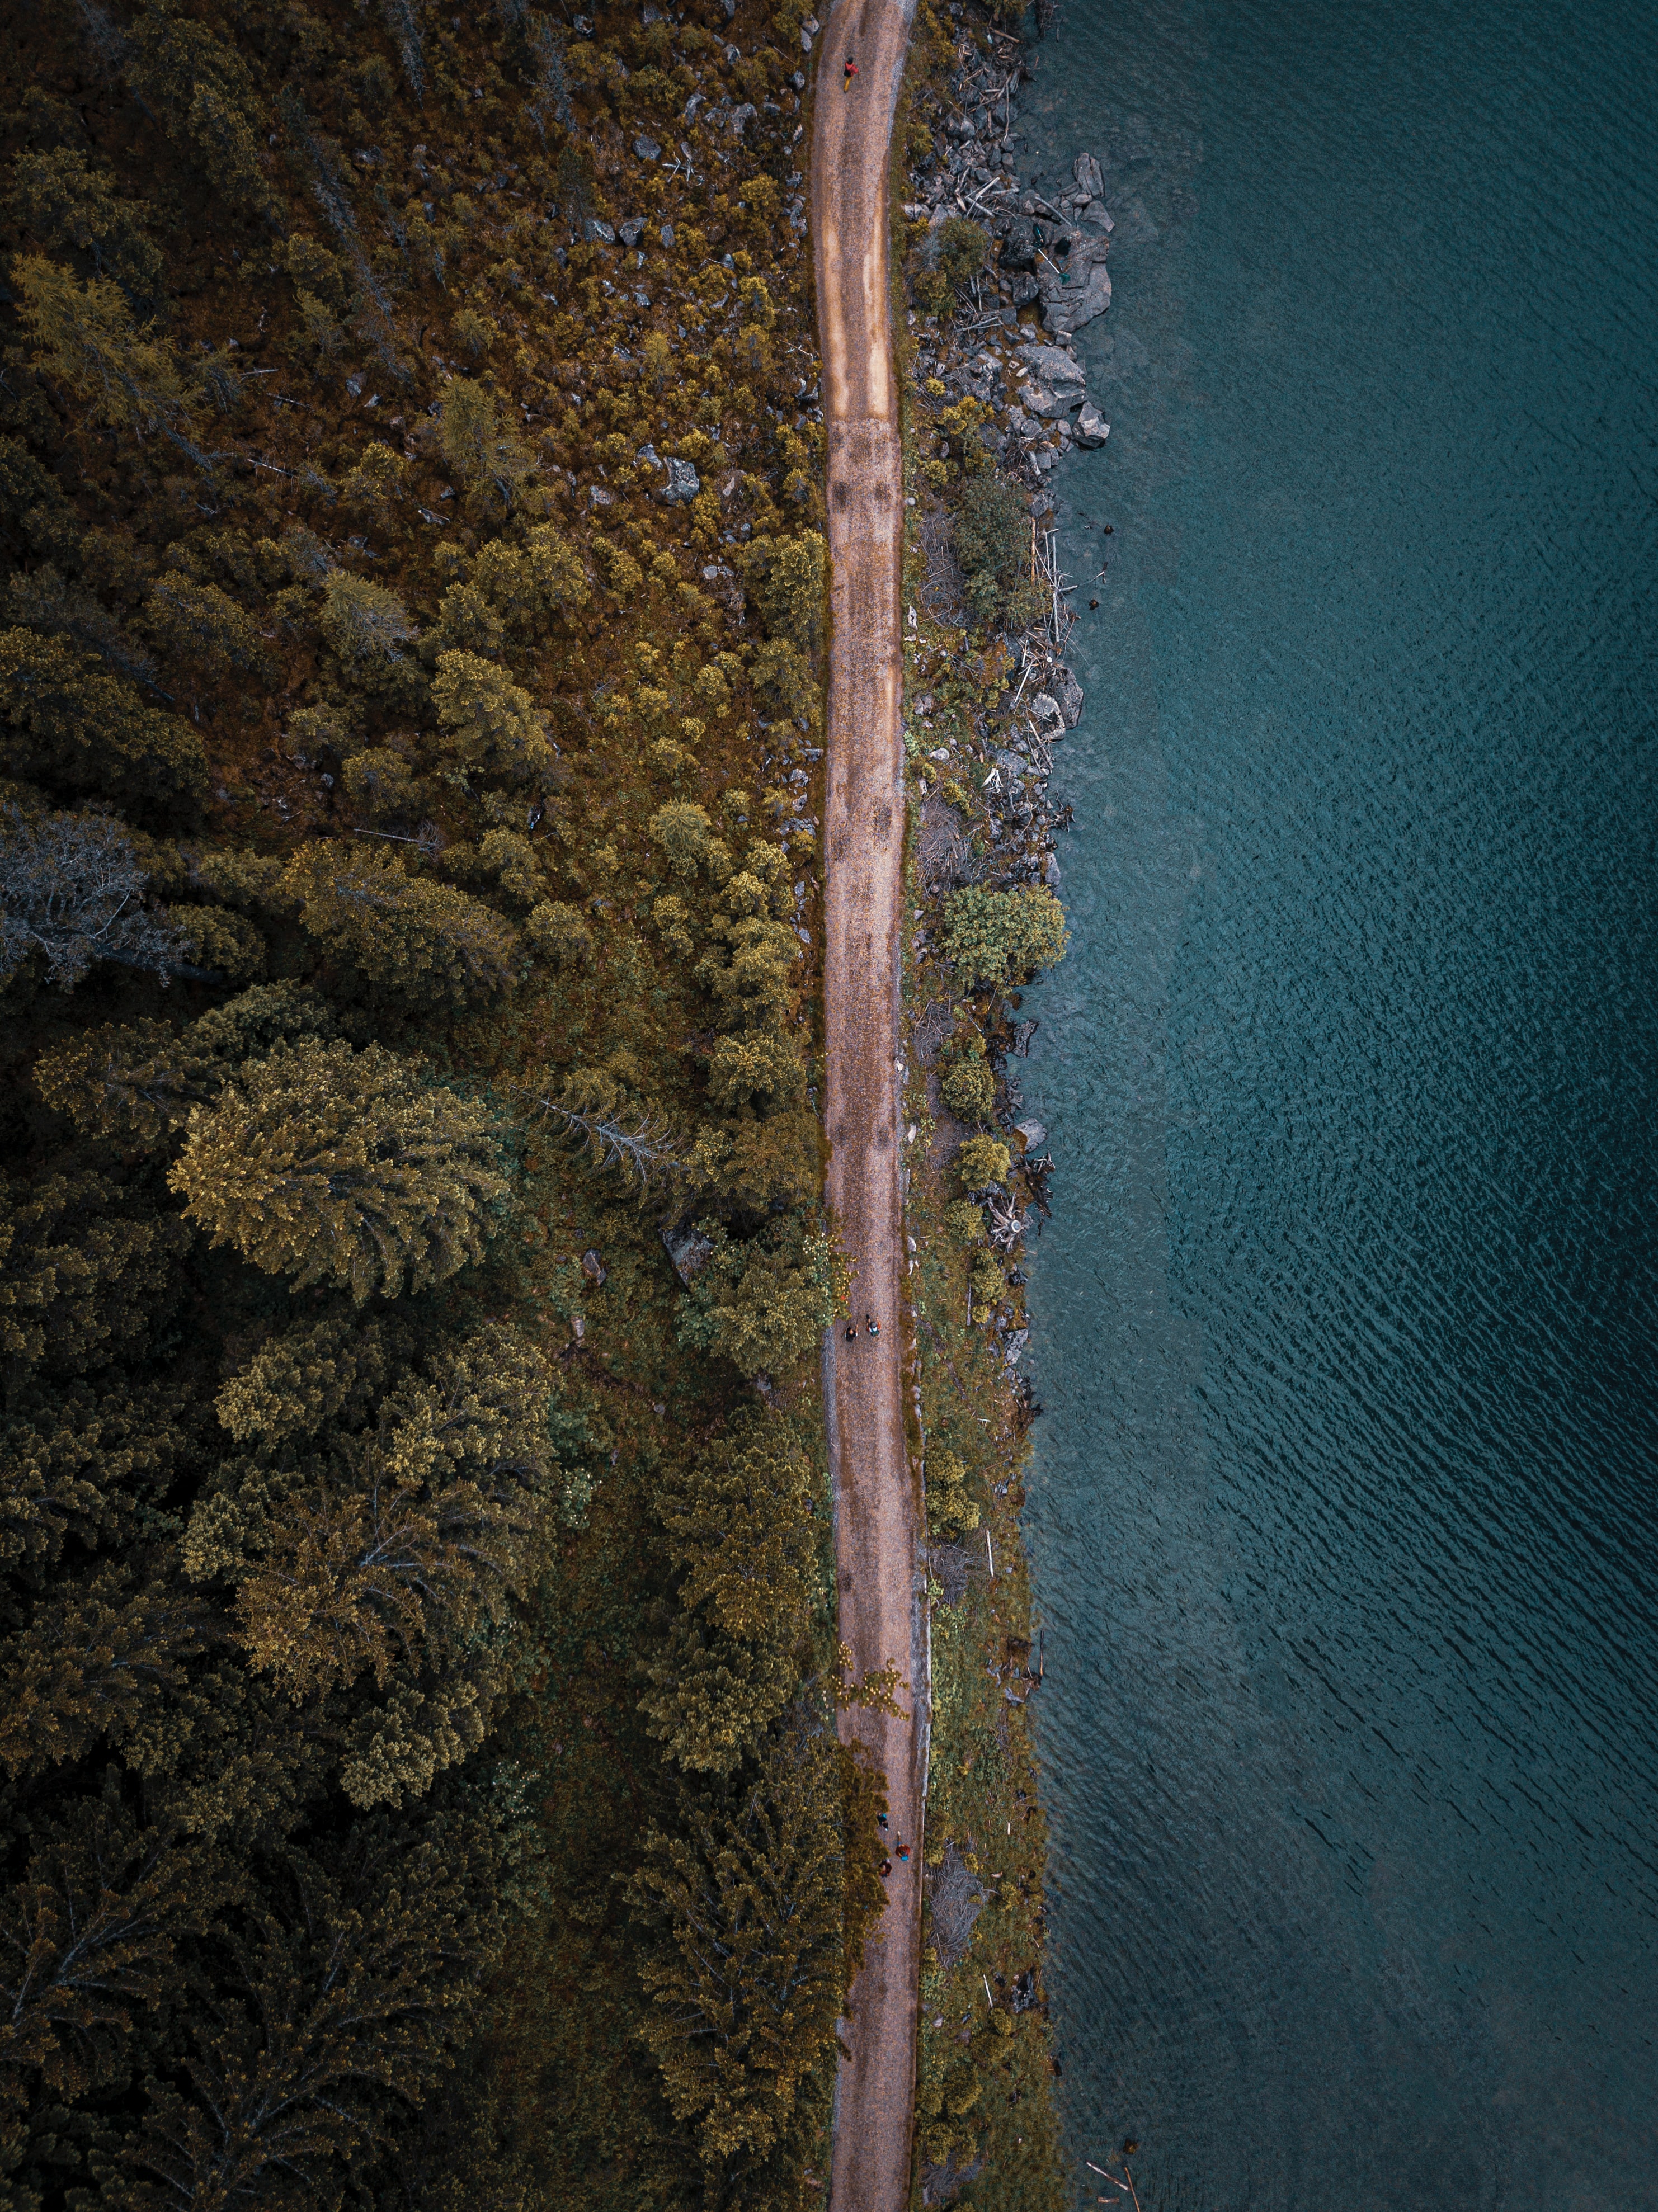 view from above, nature, trees, sea, road, forest Full HD